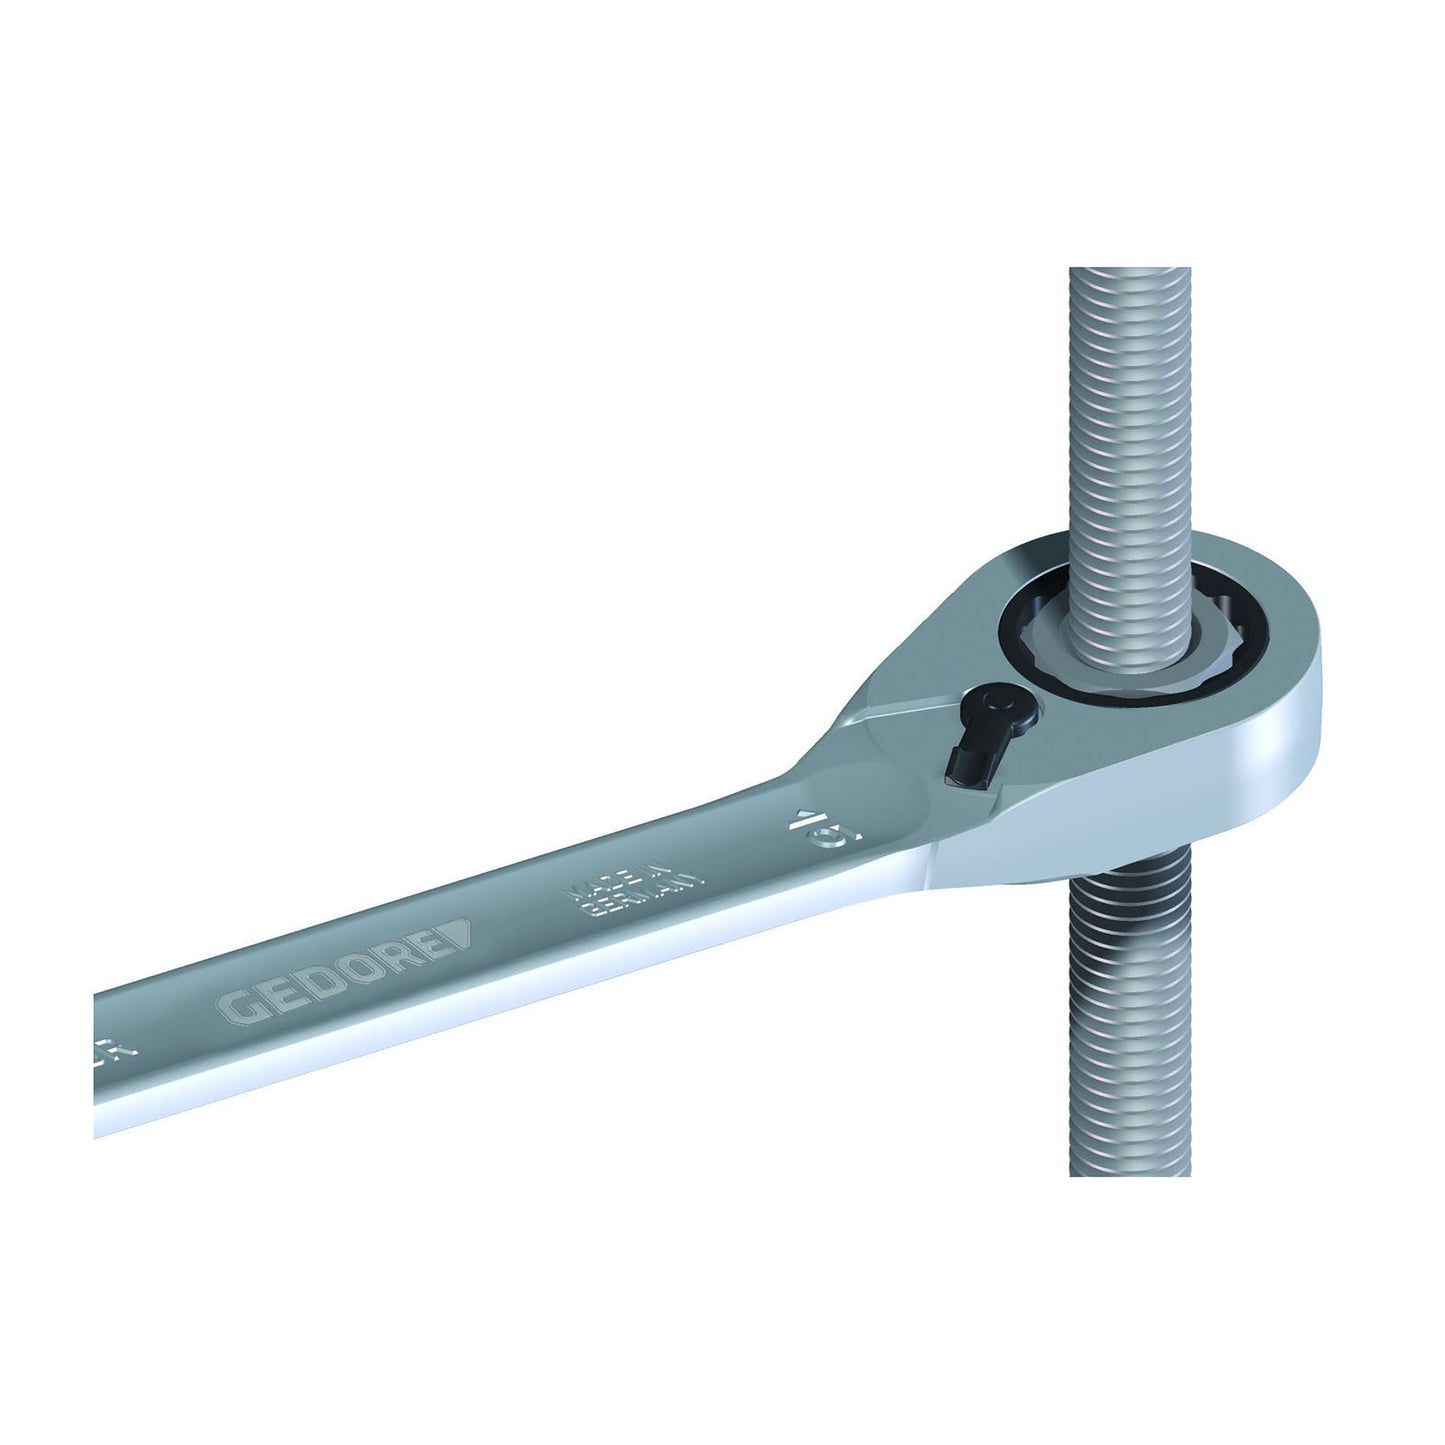 GEDORE 7 UR 10 - Ratchet combination wrench, 10mm (2297272)